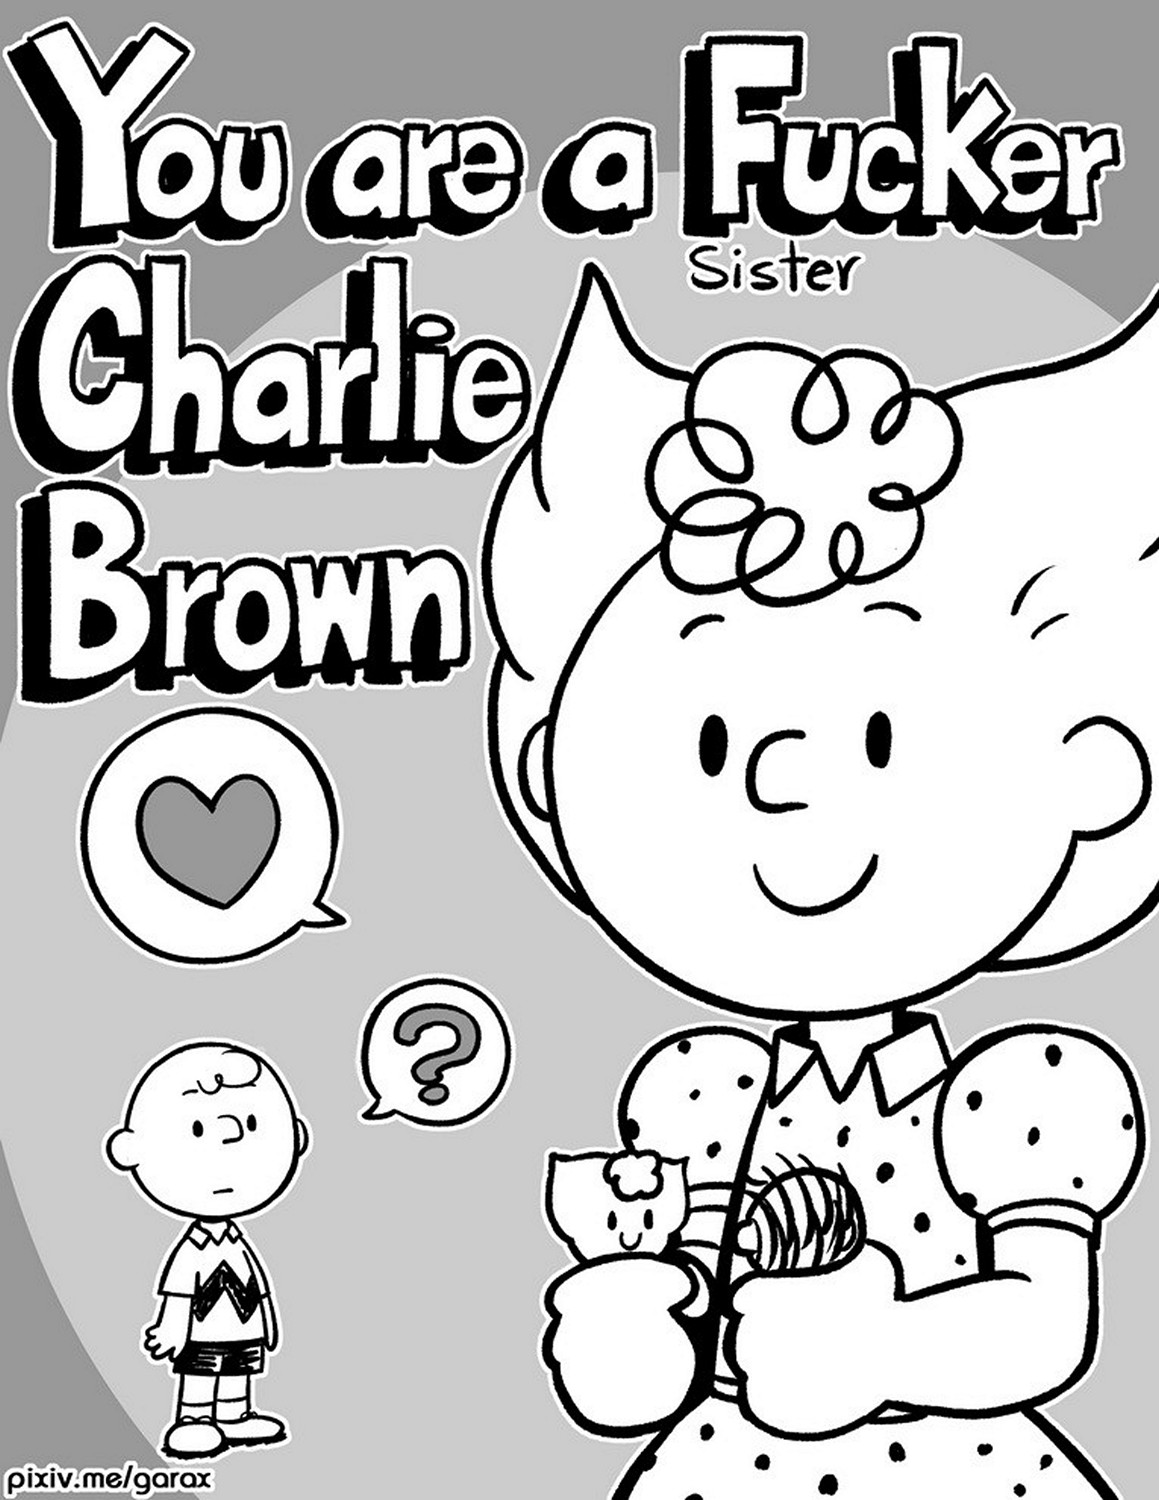 Cover You Are A Sister Fucker Charlie Brown 1